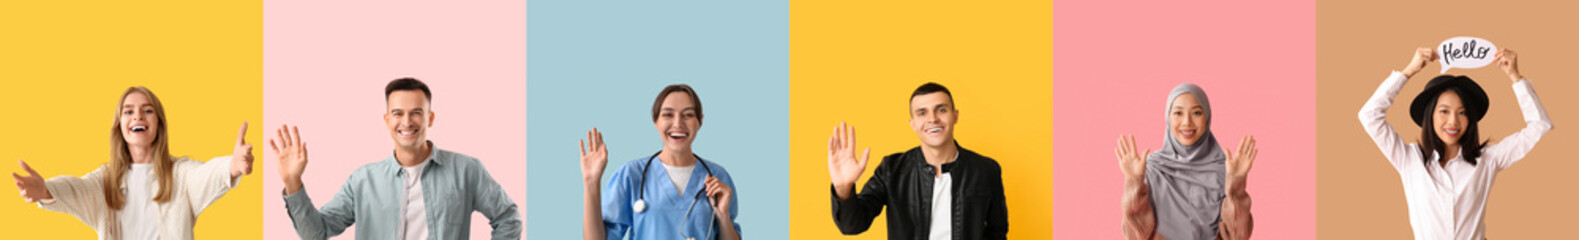 Group of friendly people on color background